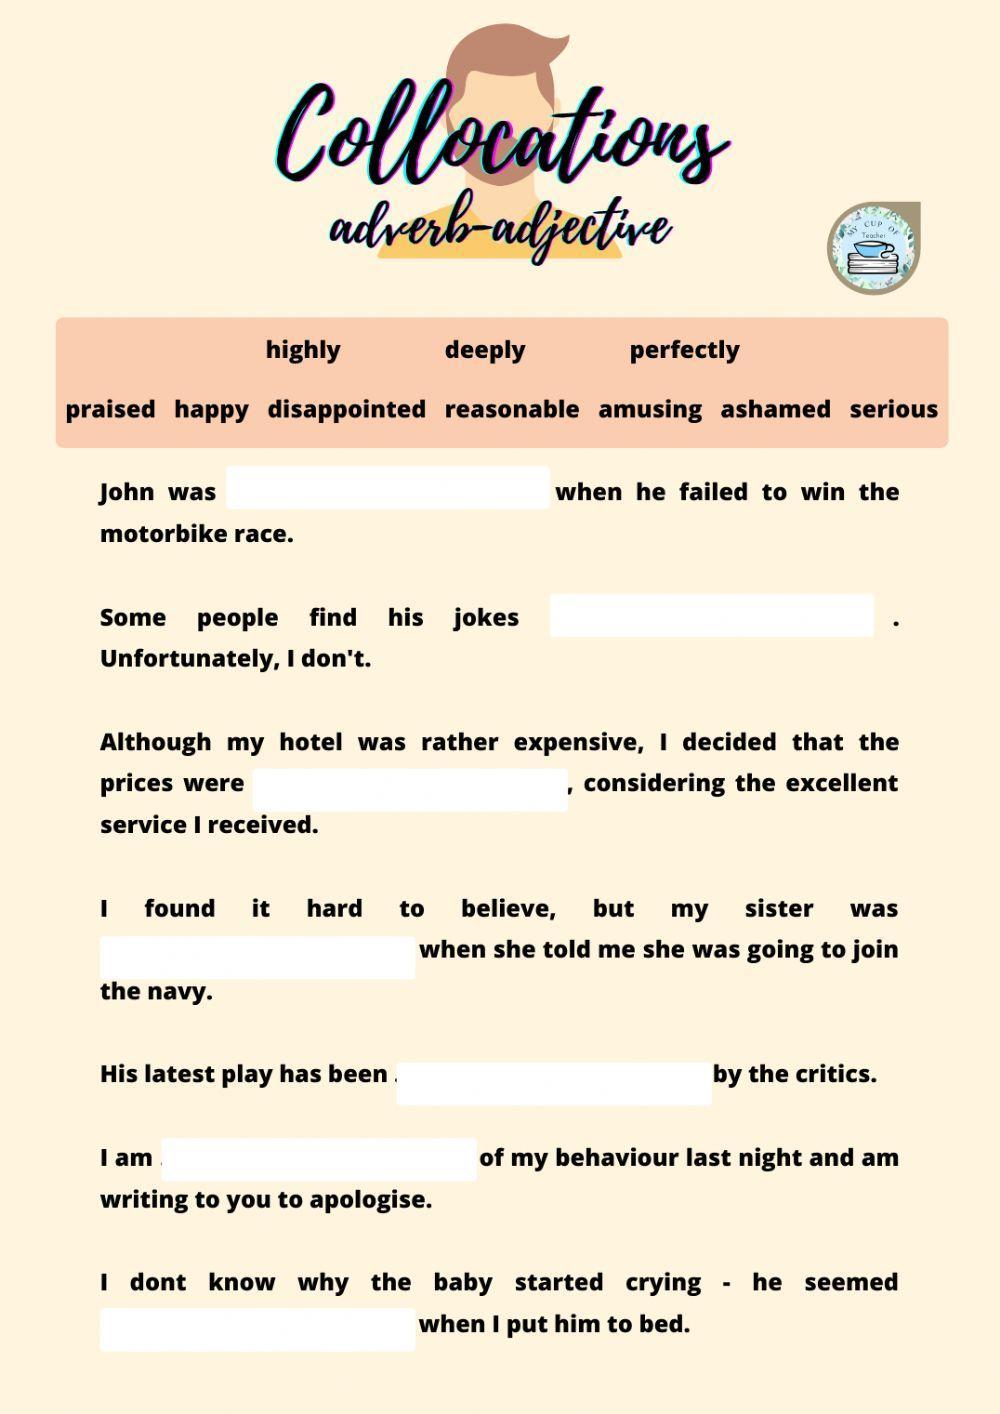 Adverb-adjective collocations